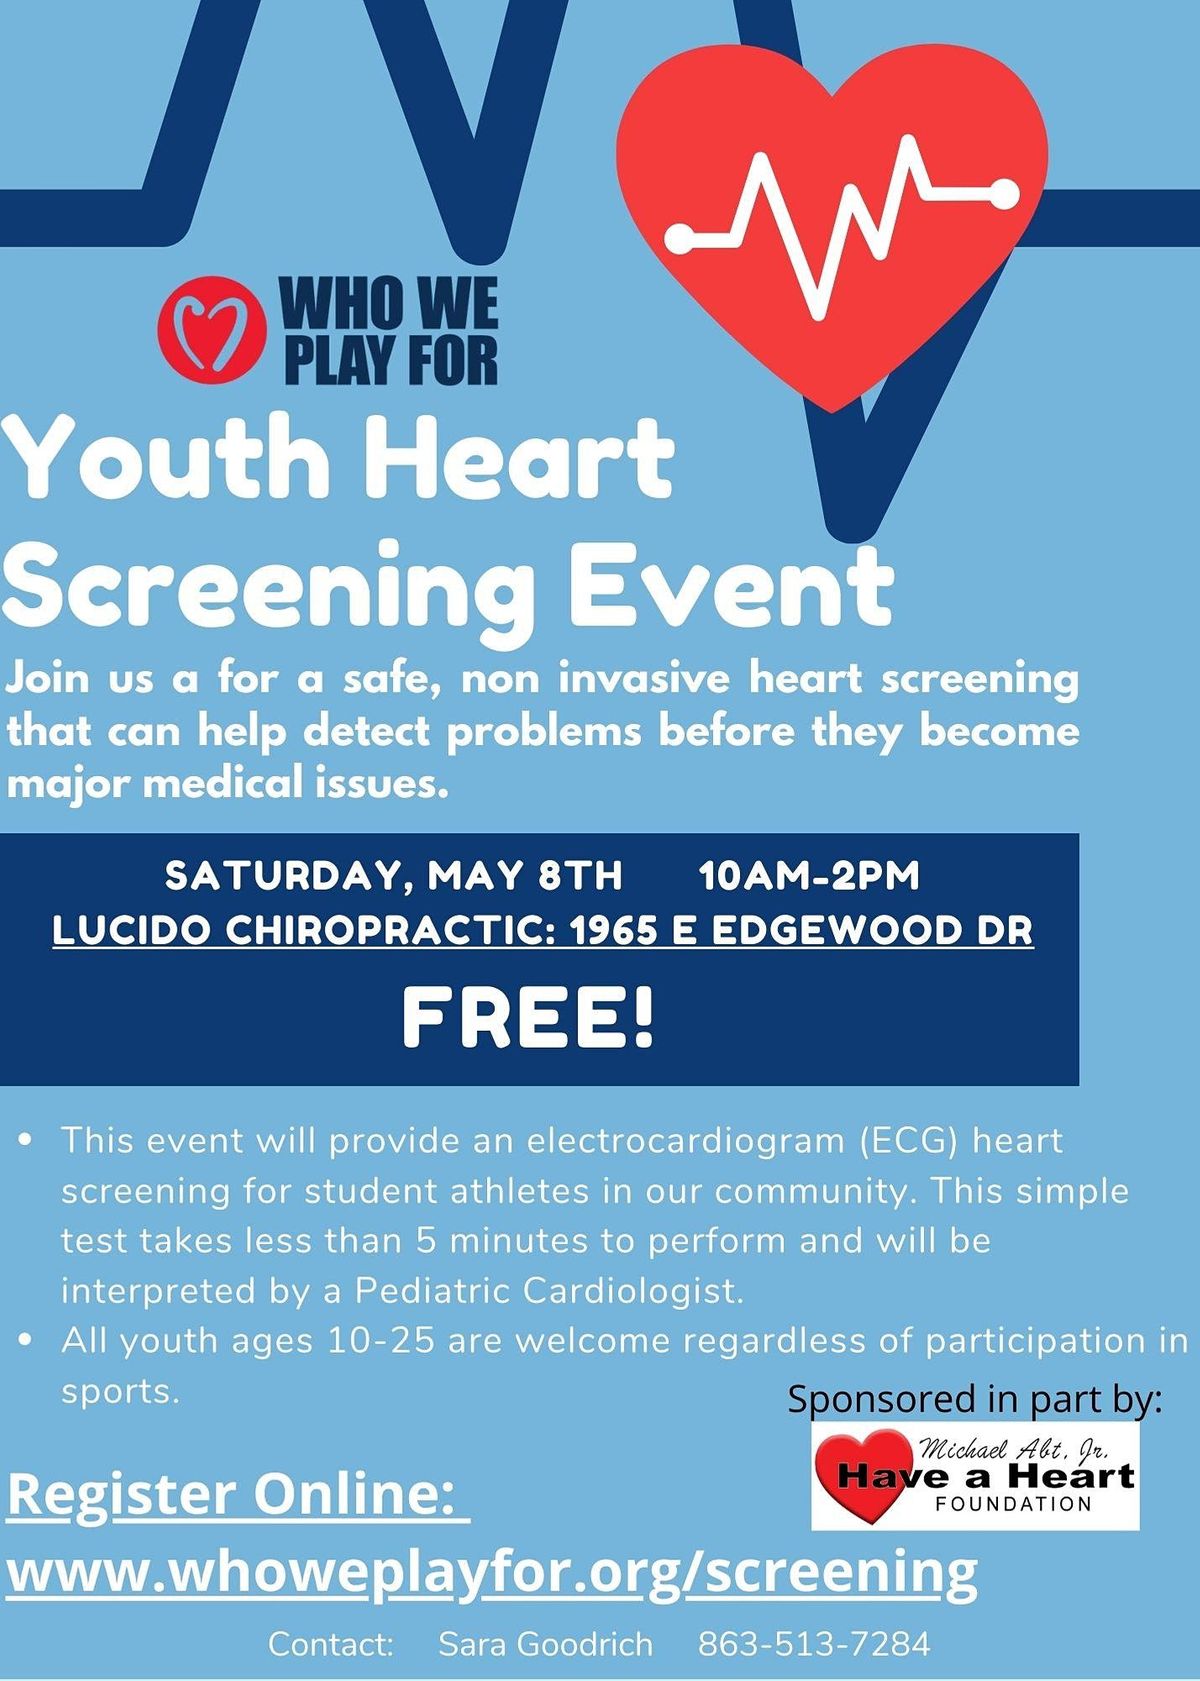 Free Youth Heart Screening Event Lucido Chiropractor Lakeland 8 May 2021